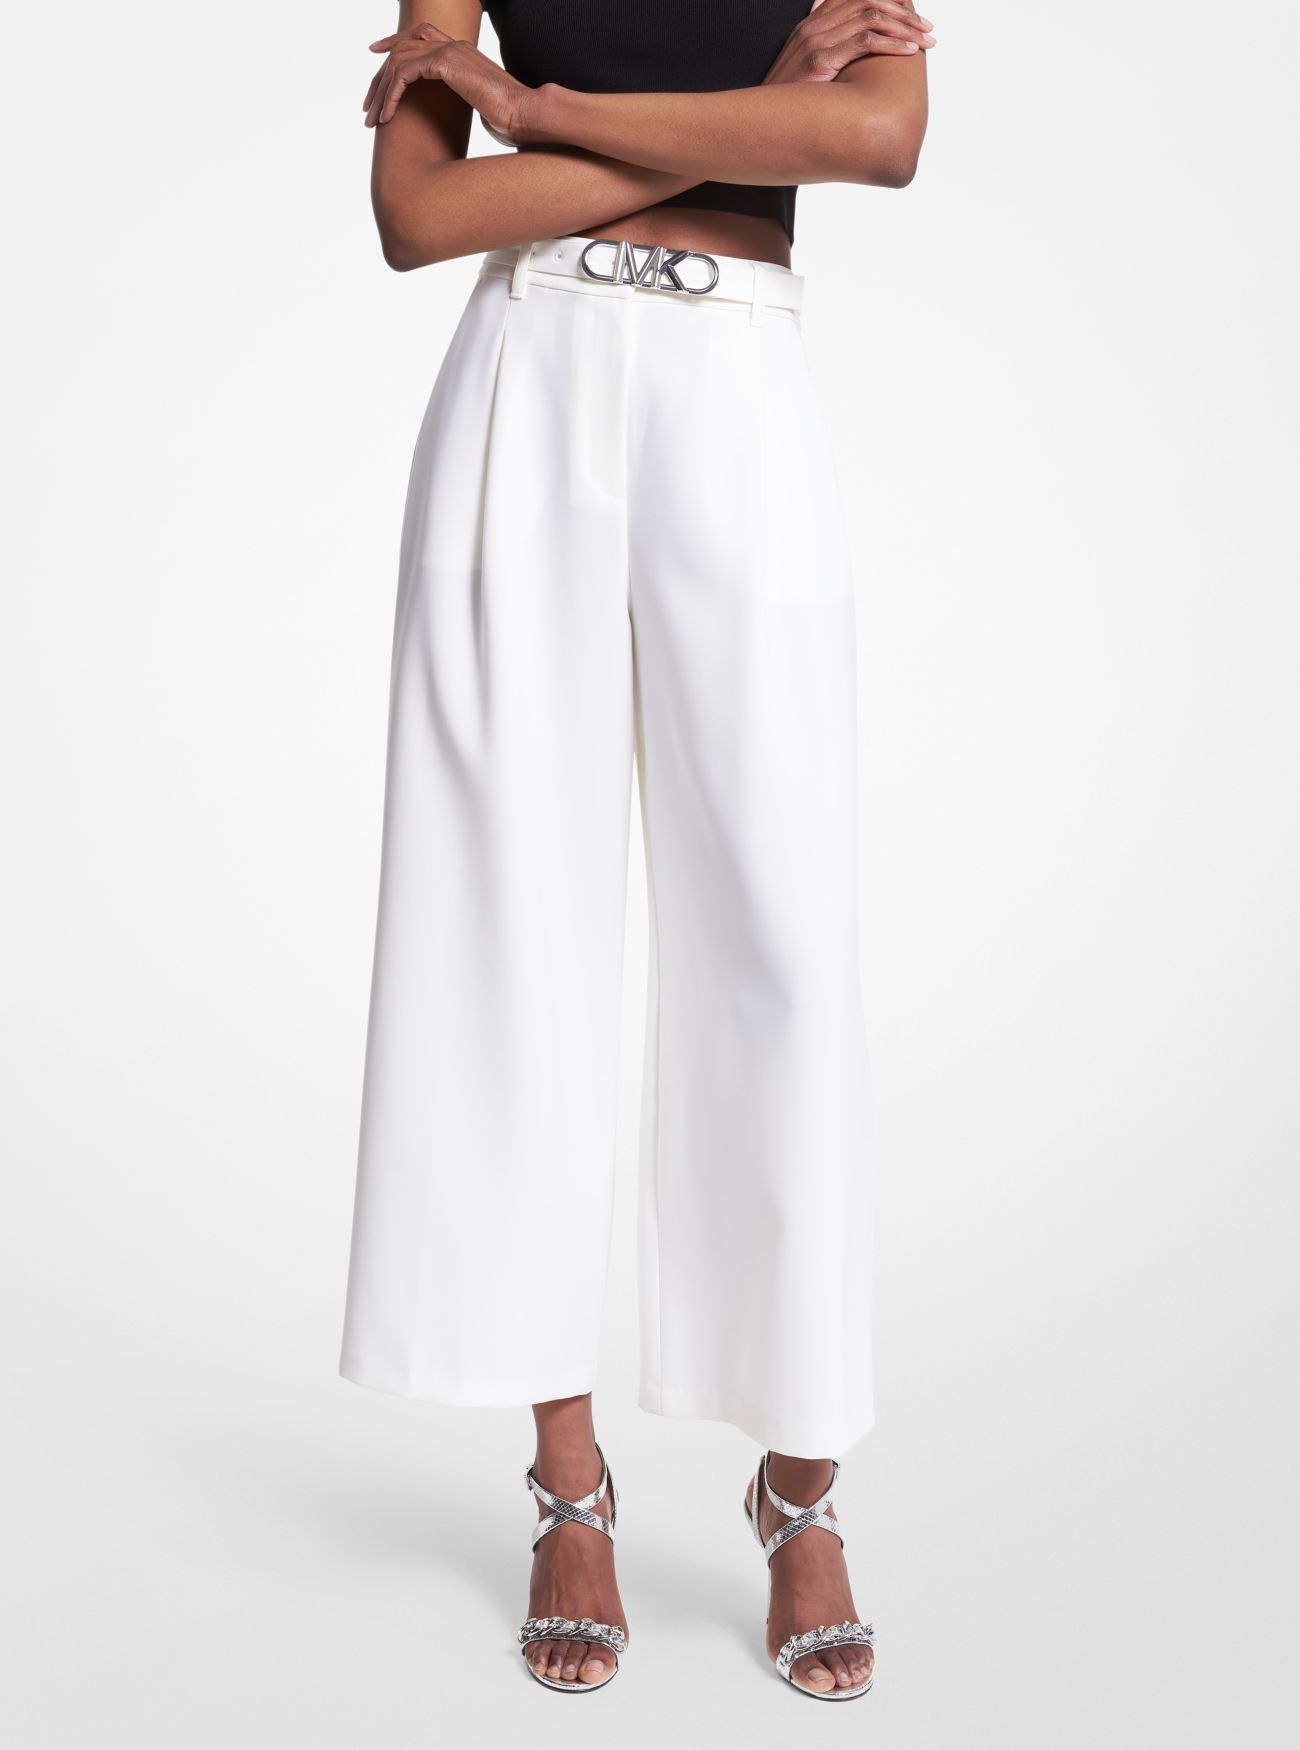 MICHAEL KORS CROPPED STRETCH TWILL BELTED ΠΑΝΤΕΛΟΝΙ